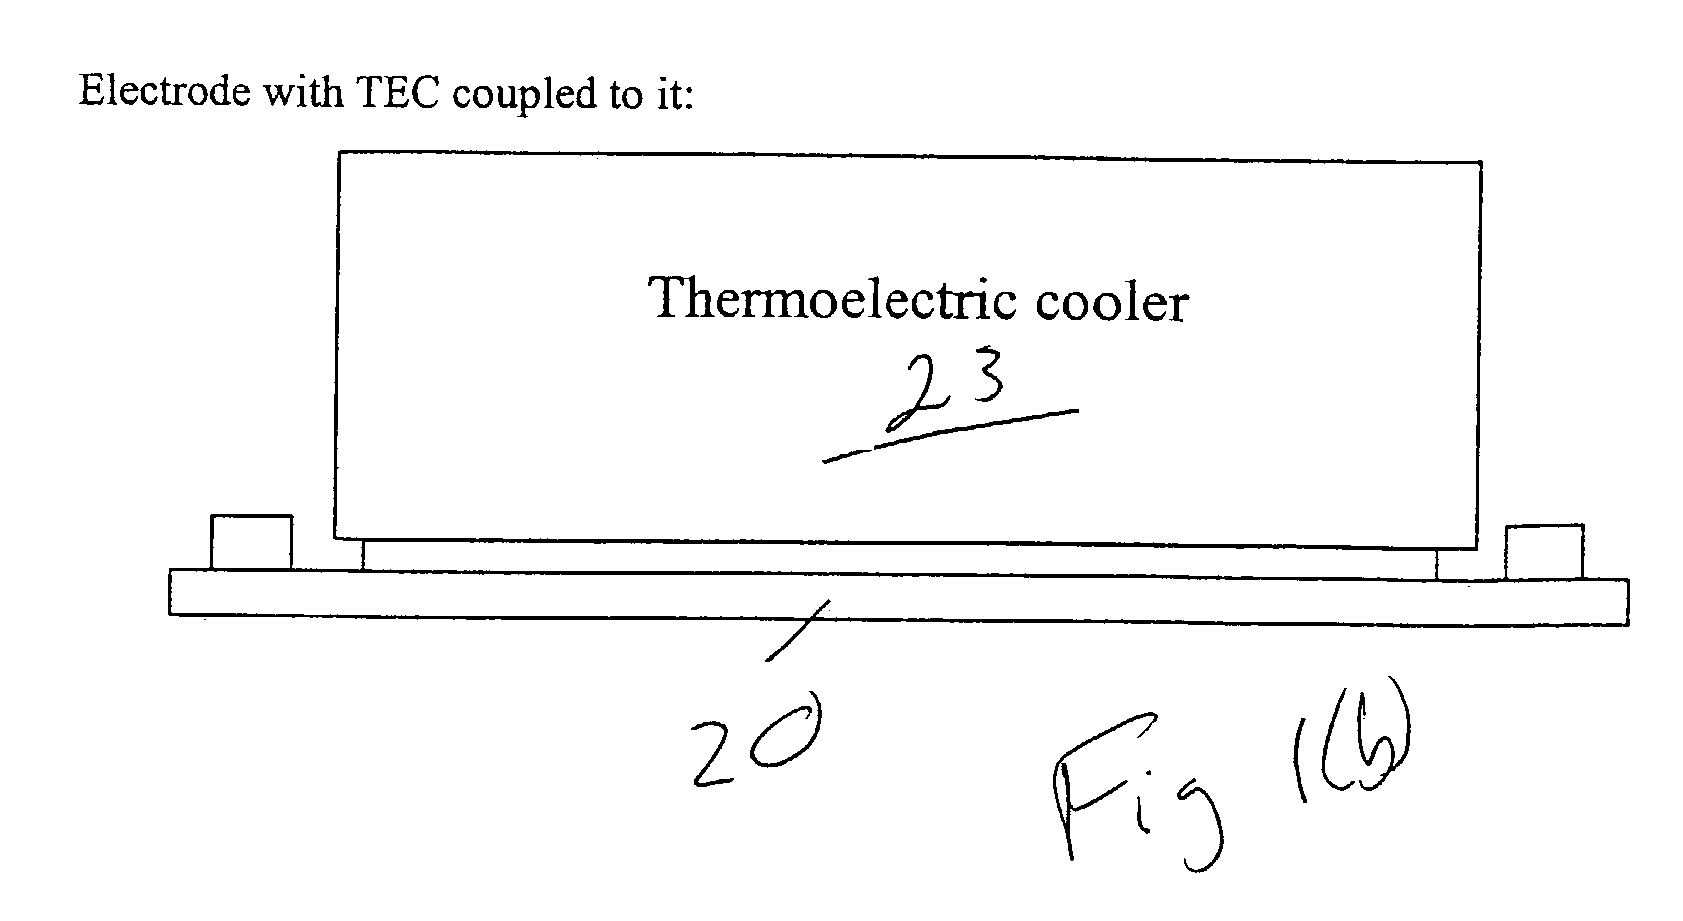 Treatment apparatus with electromagnetic energy delivery device and non-volatile memory